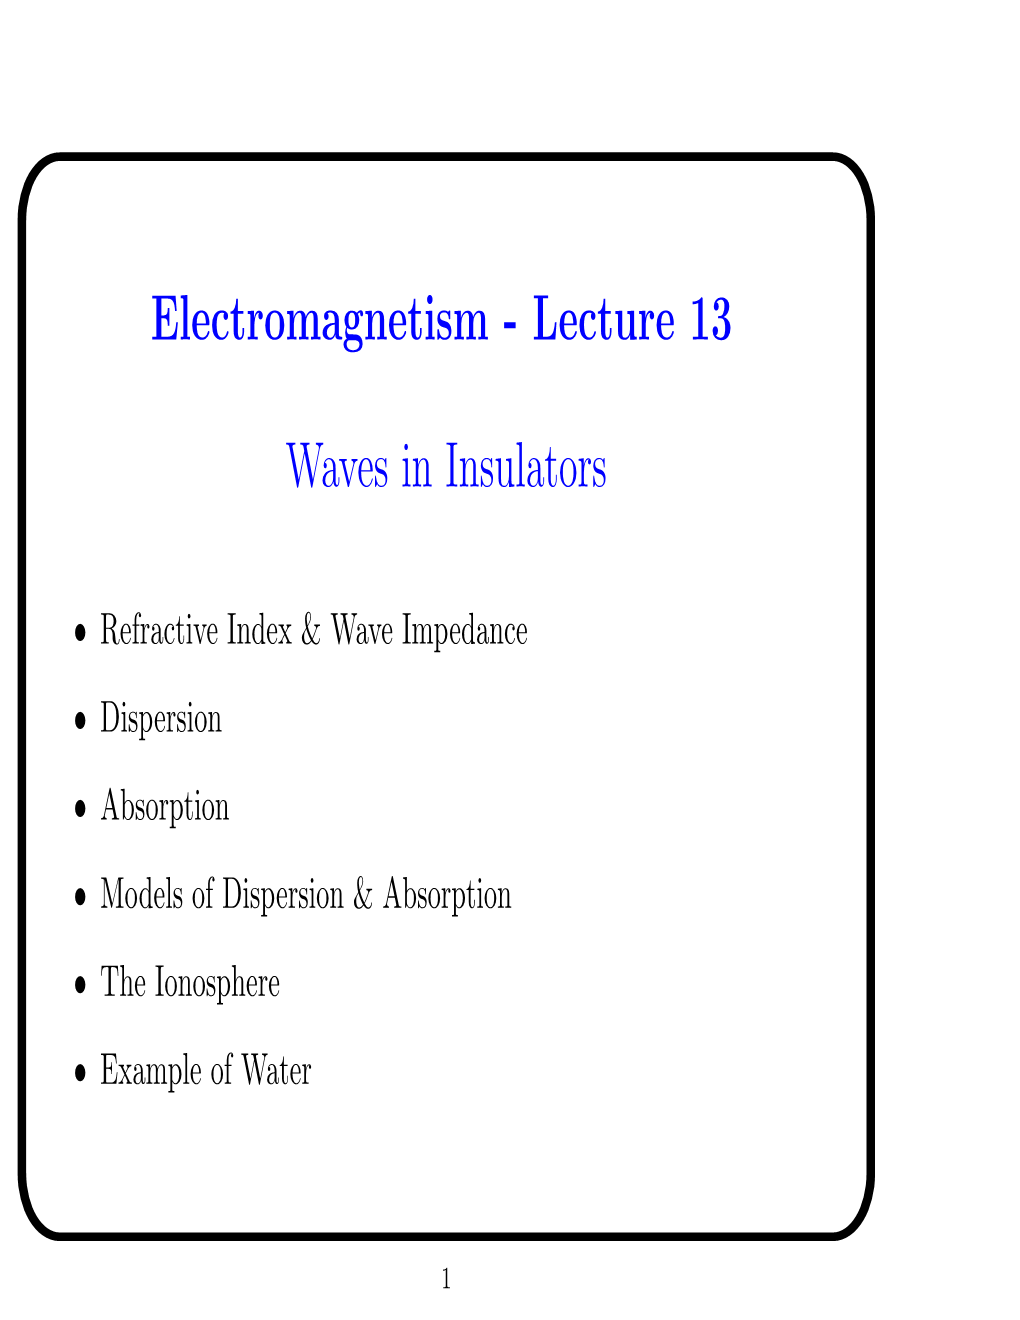 Electromagnetism - Lecture 13